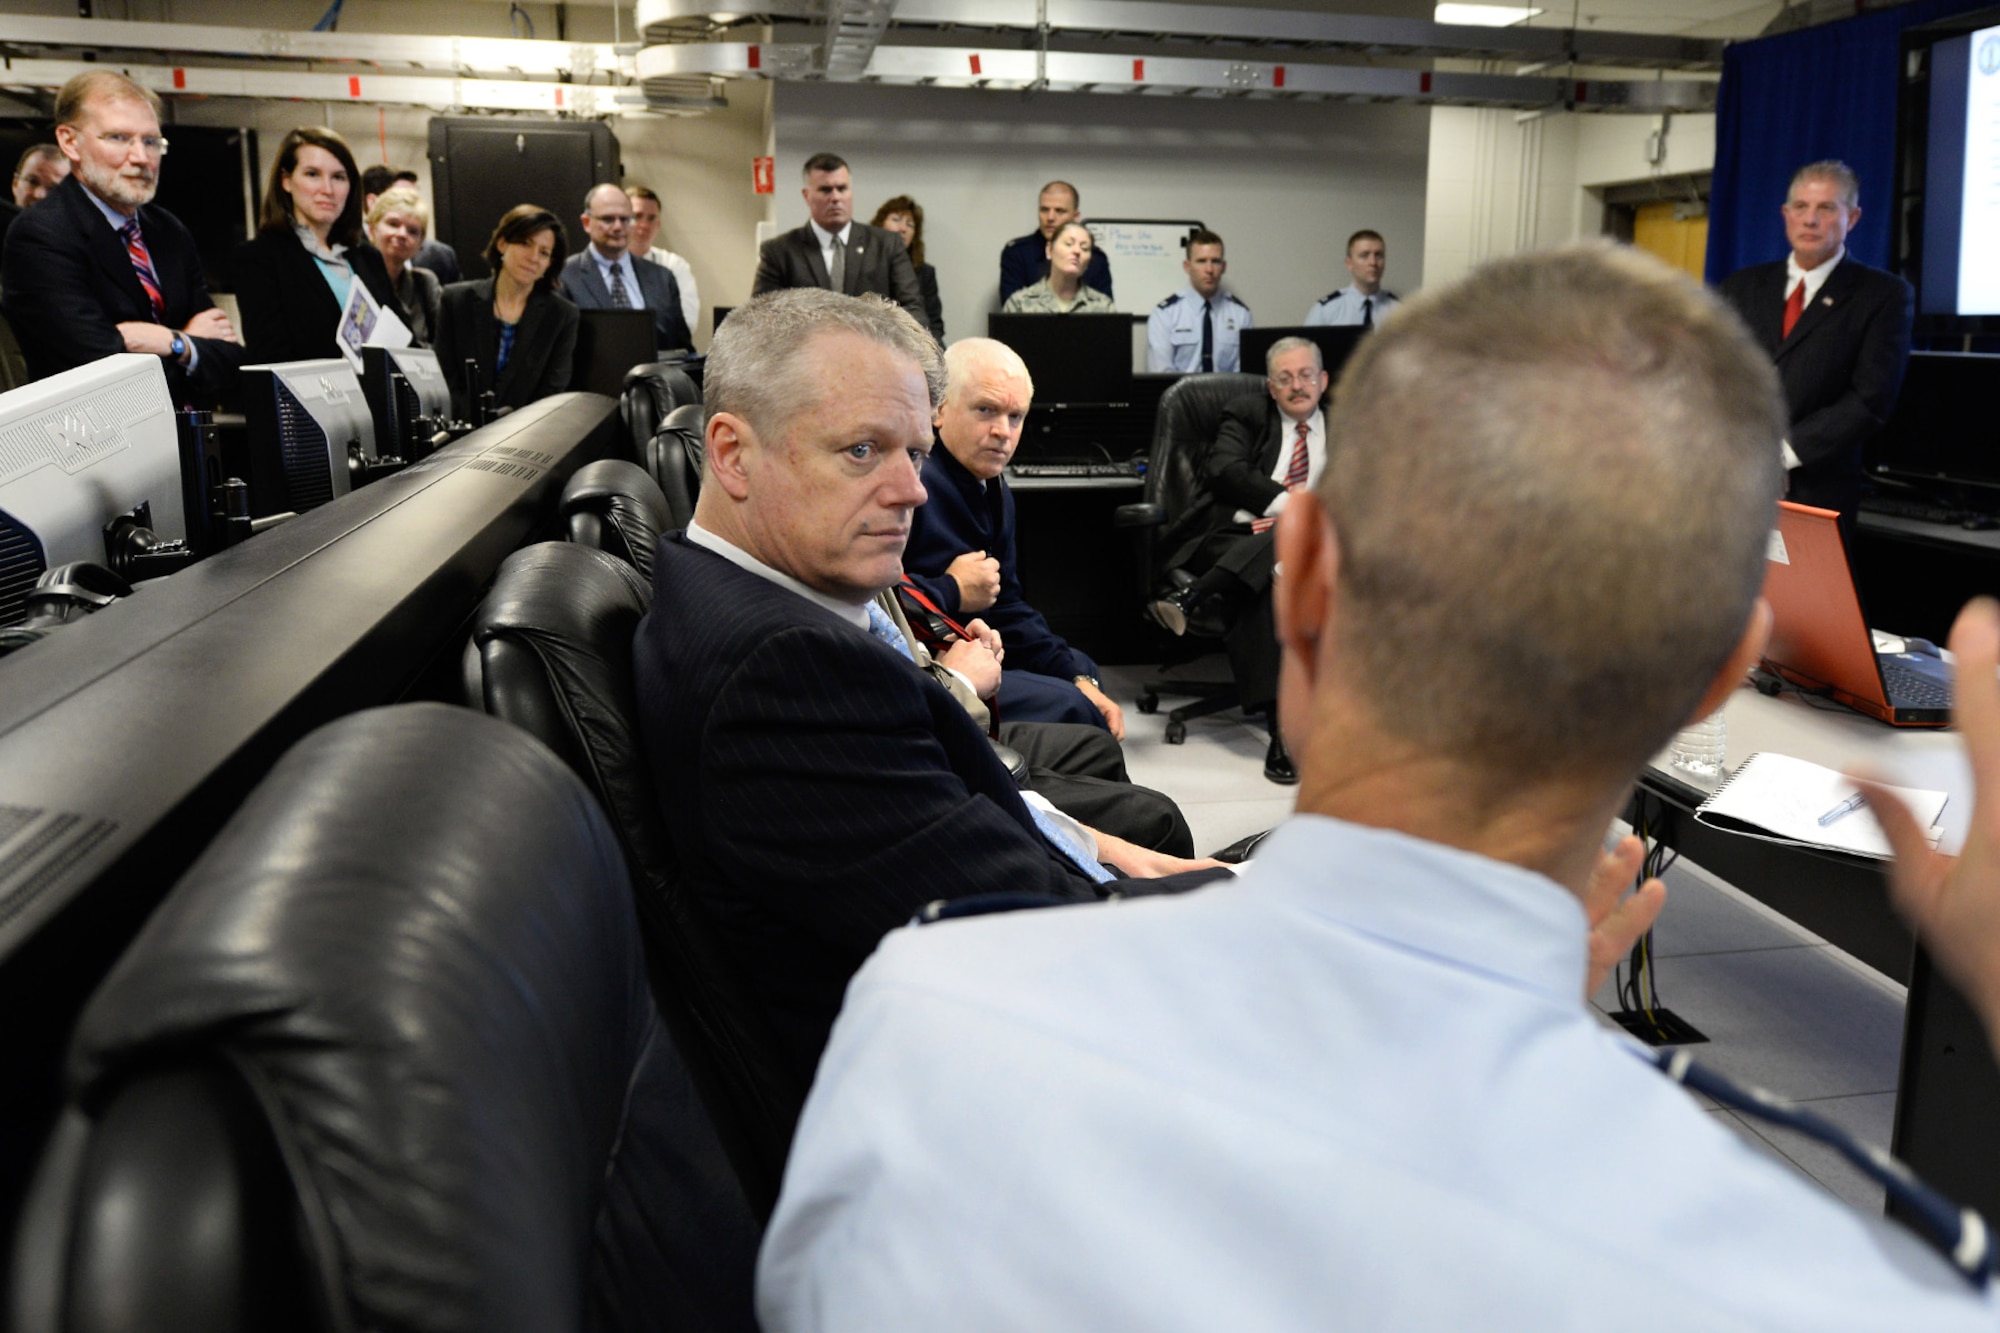 Mass. Governor Charlie Baker listens to Maj. Gen. Craig Olson, Command, Control, Communications, Intelligence Directorate program executive officer, during a visit to the Hanscom Collaboration and Innovation Center April 10. The governor also saw program demonstrations and received briefings from each of the program executive officers and the base commander. (U.S. Air Force photo by Mark Herlihy)